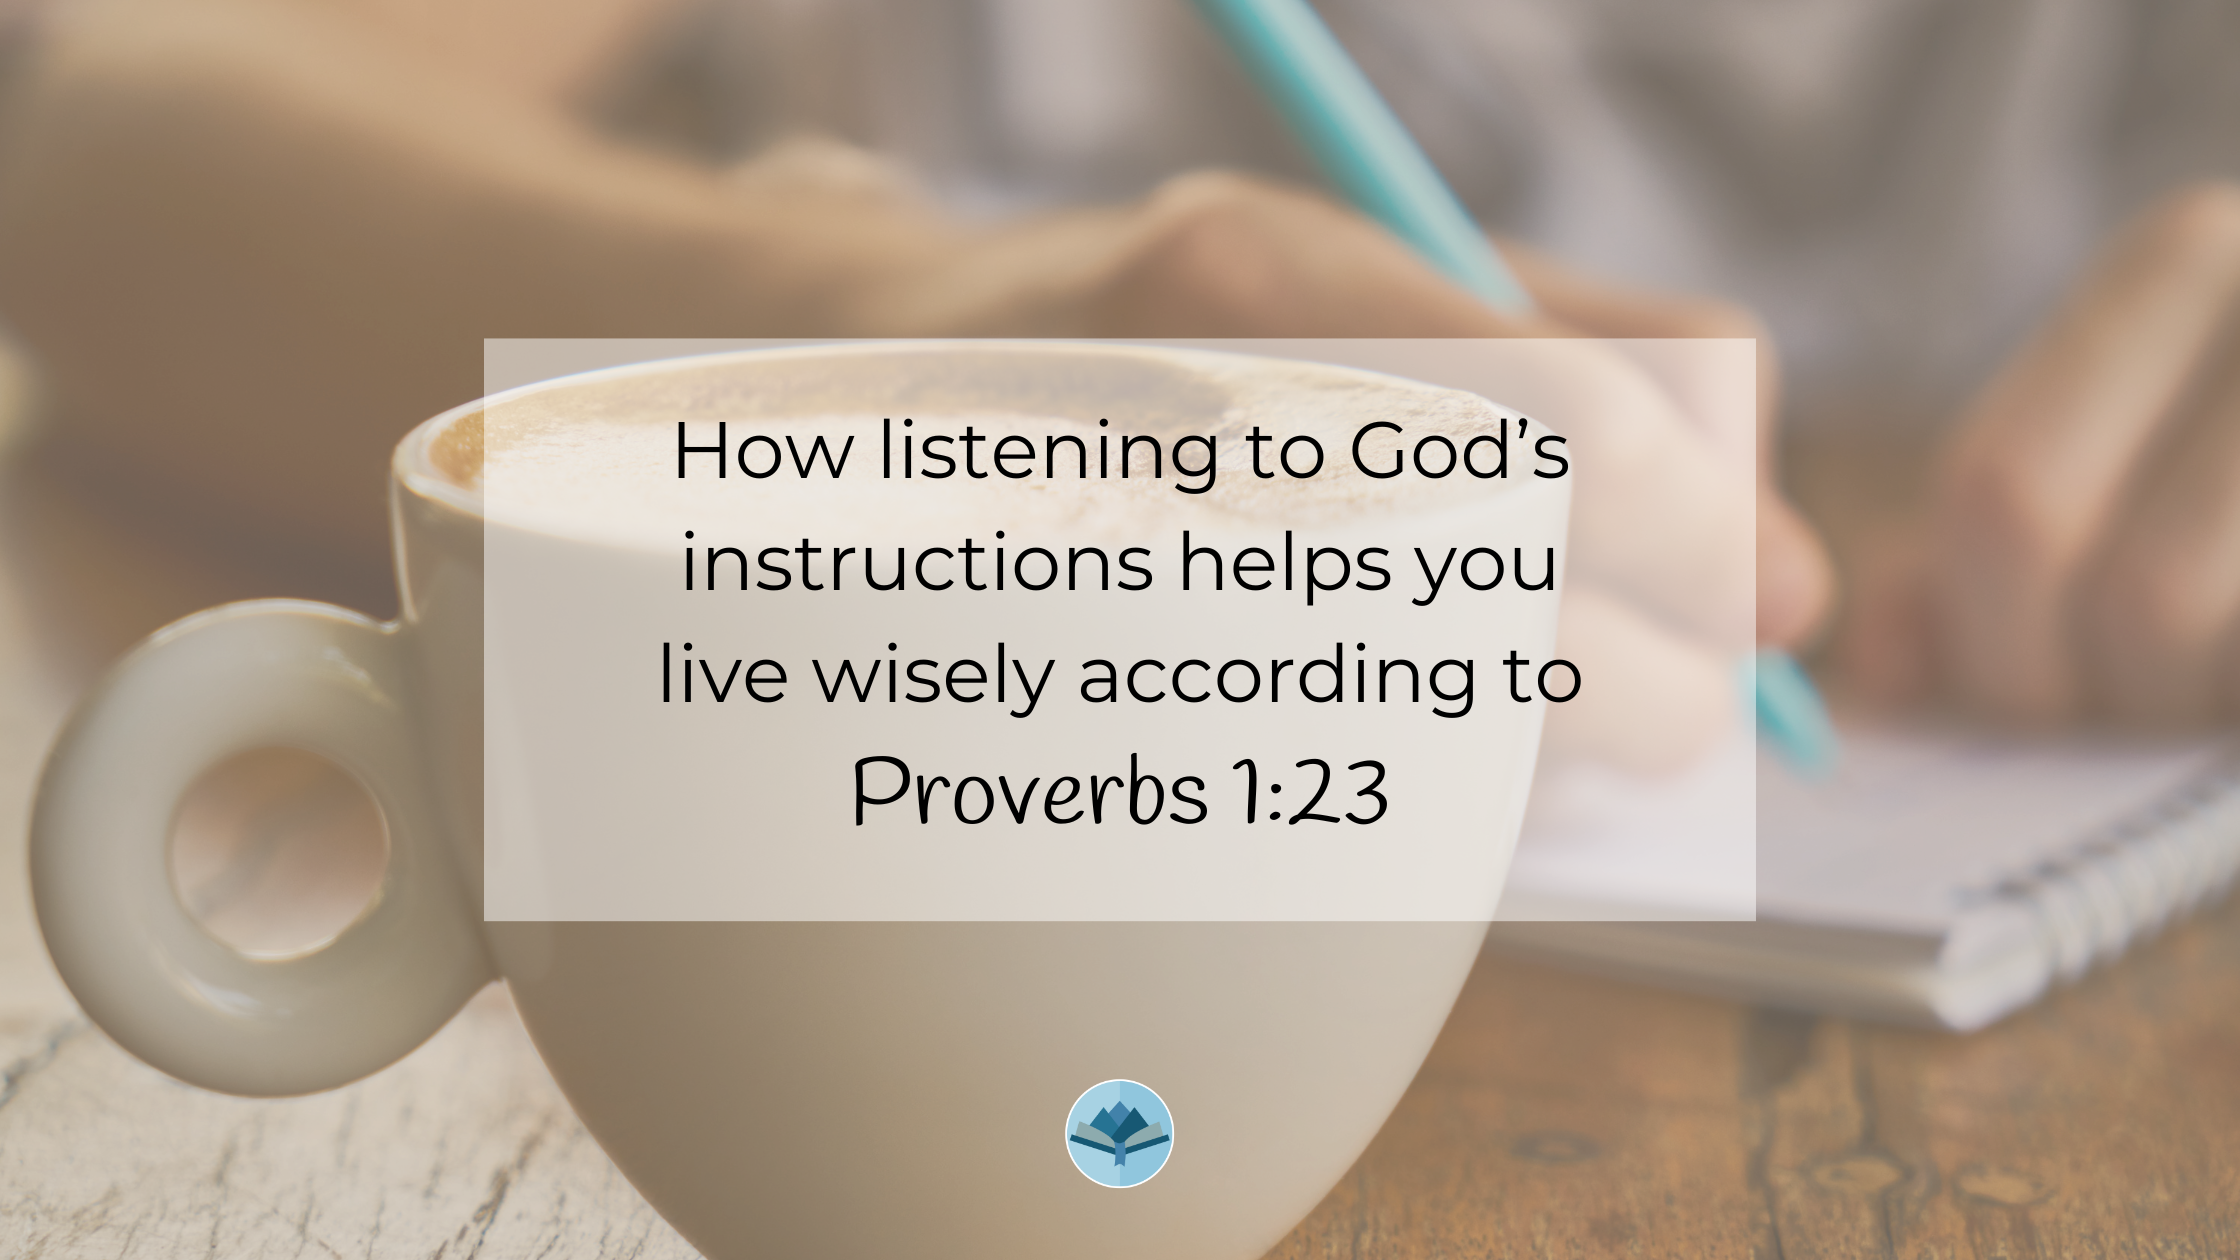 How listening to God’s instructions helps you live wisely according to Proverbs 1:23